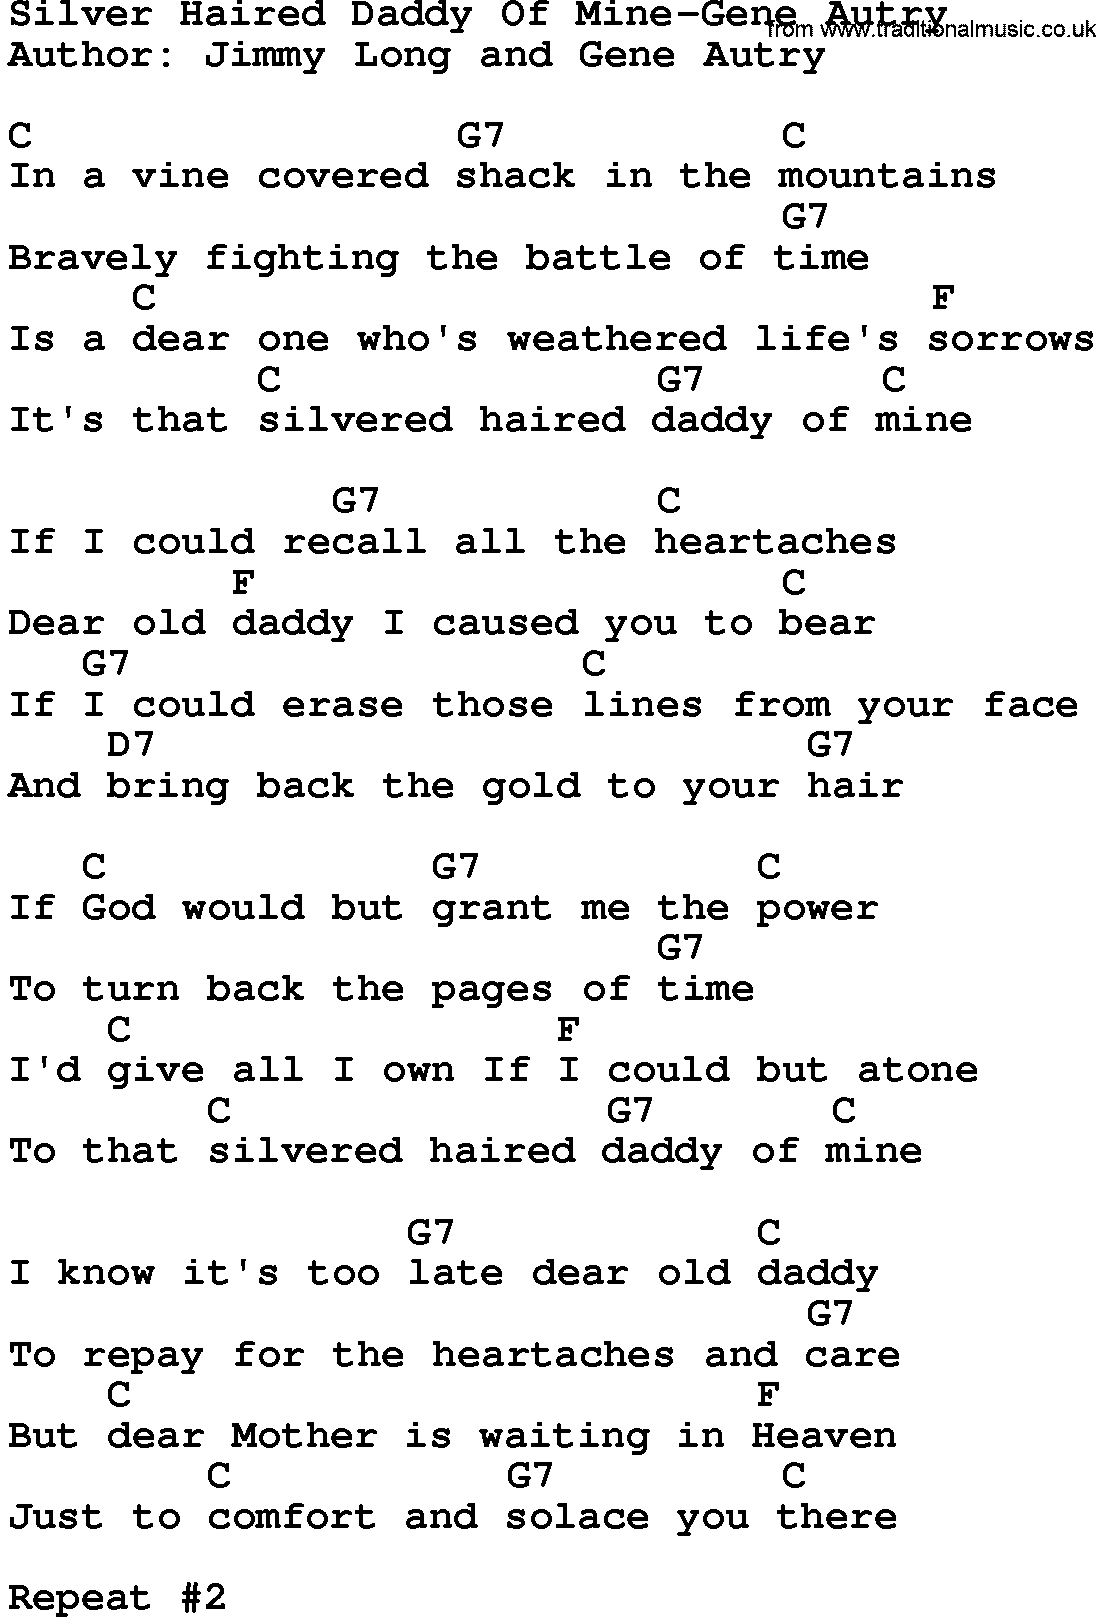 Country music song: Silver Haired Daddy Of Mine-Gene Autry lyrics and chords